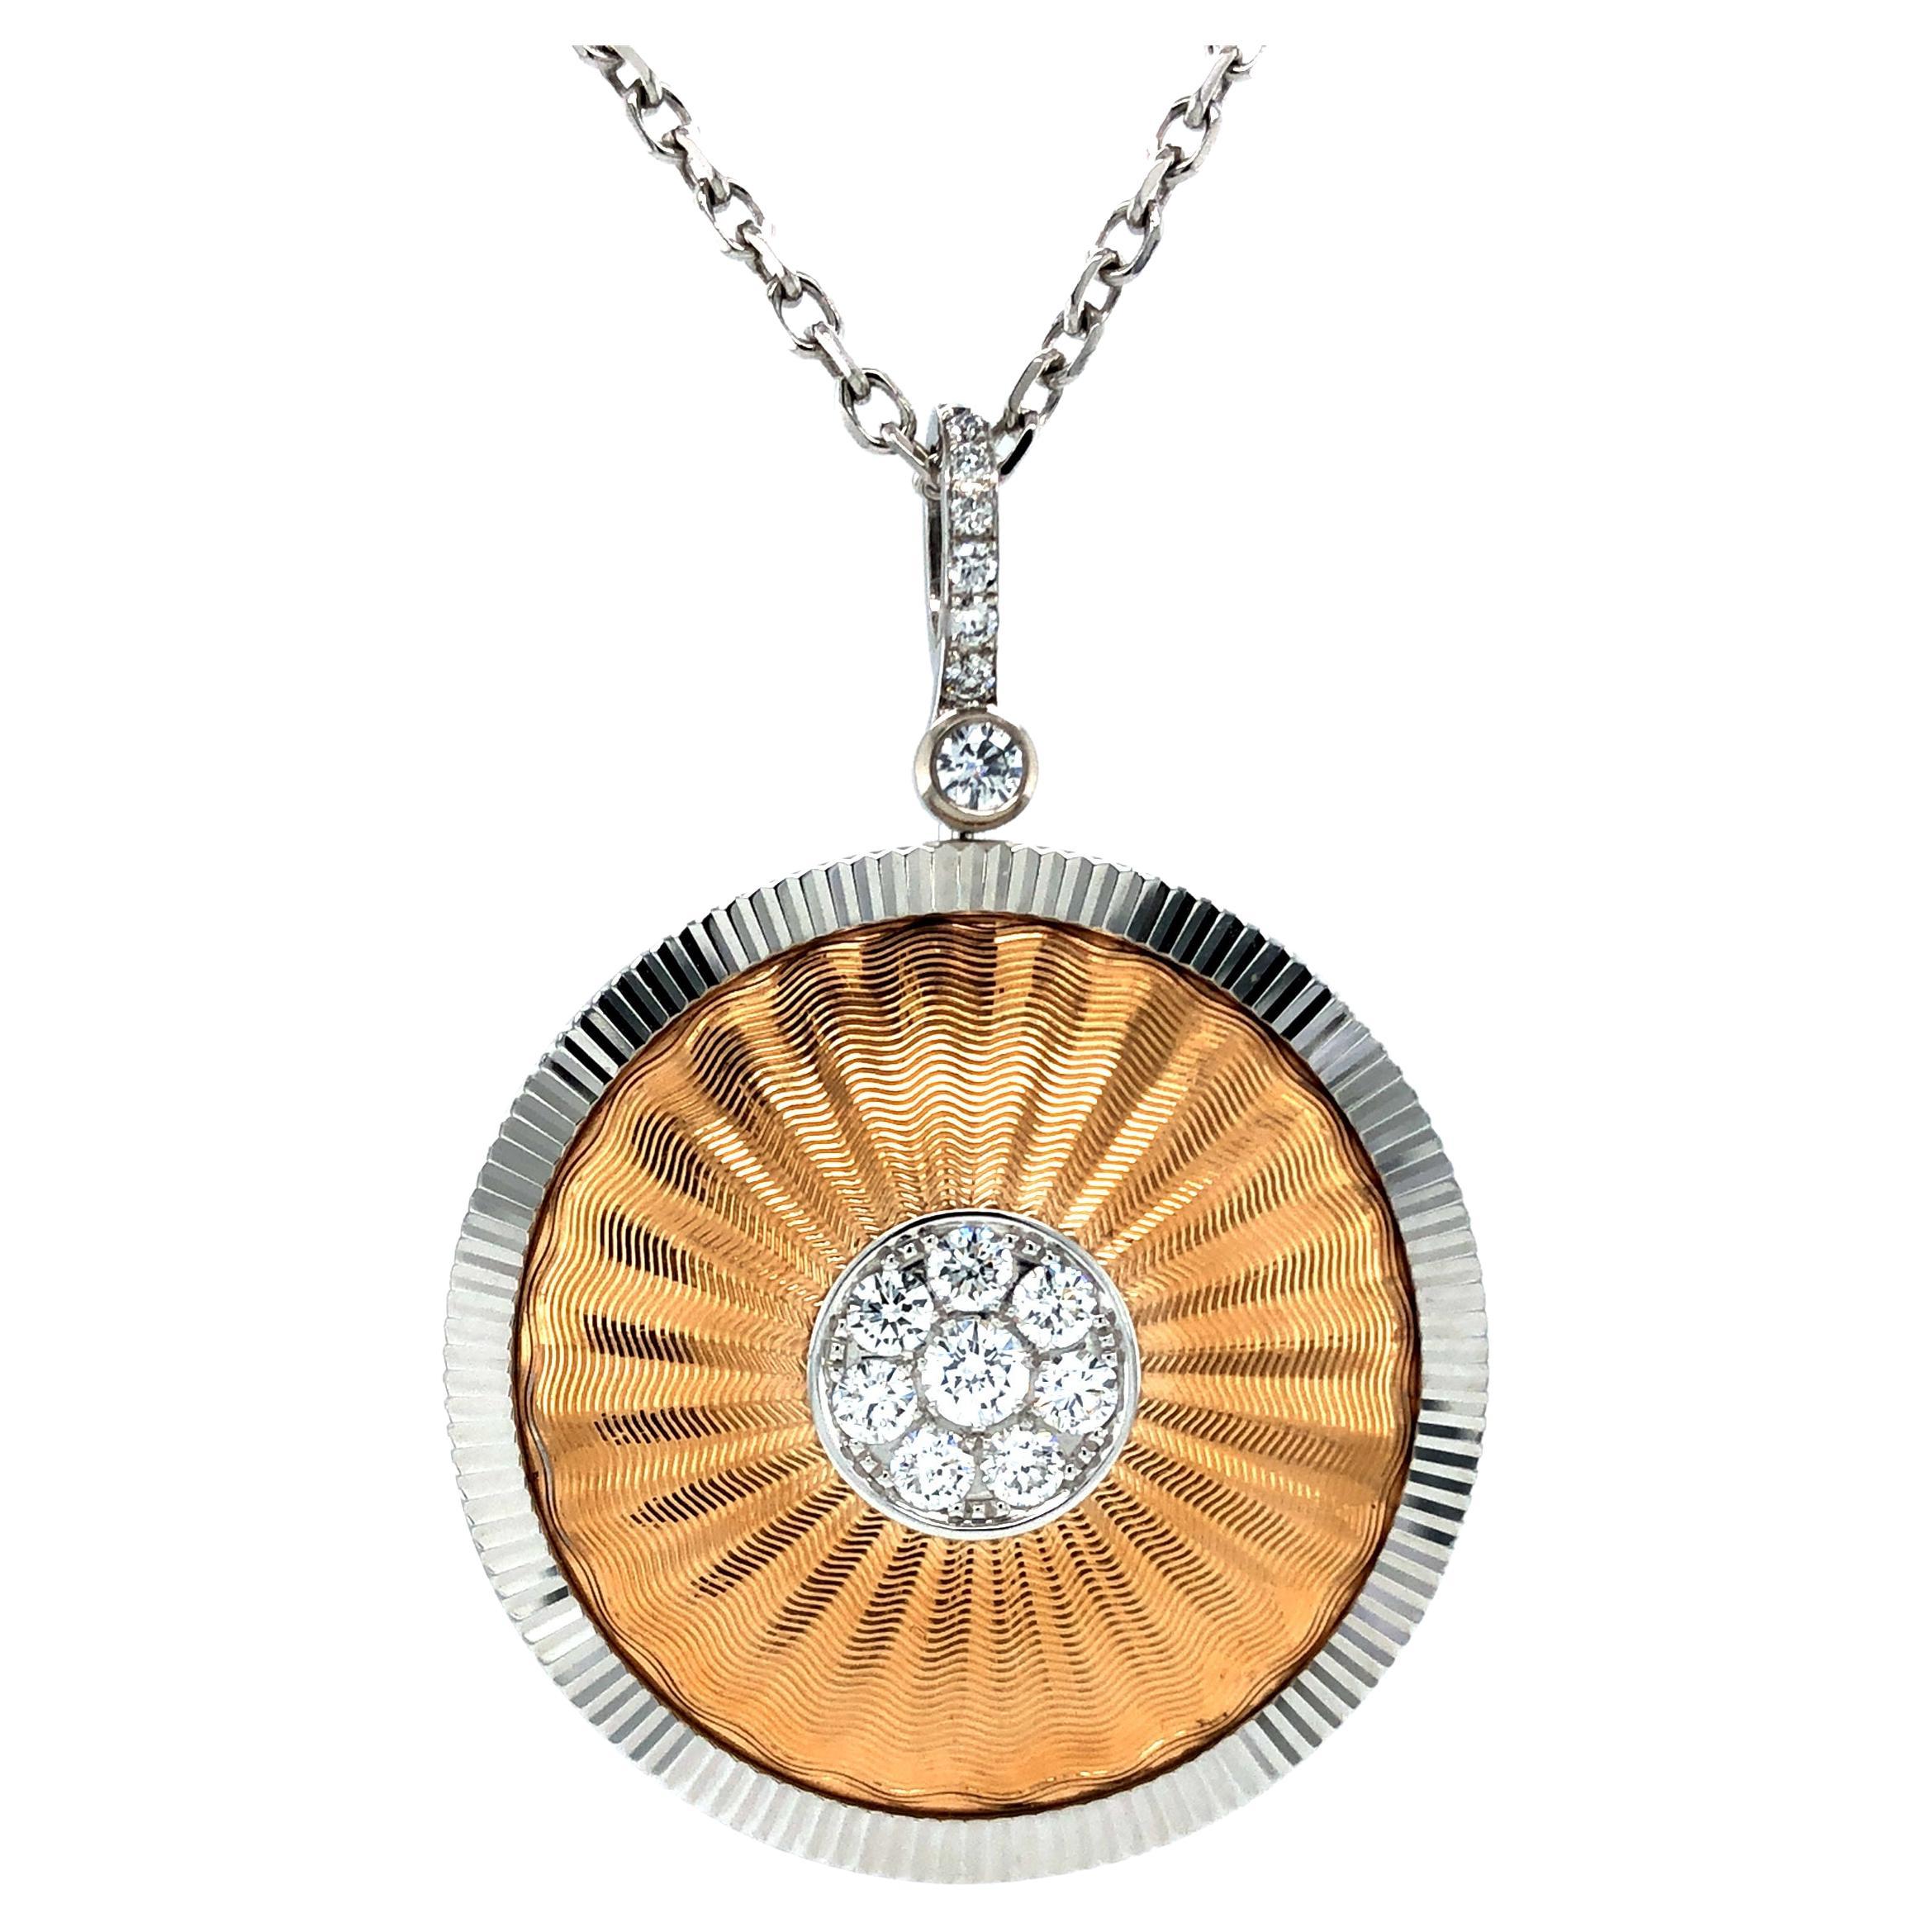 Round Pendant - 18k Rose and White Gold - 18 Diamonds total 0.58 ct - Guilloché For Sale 1